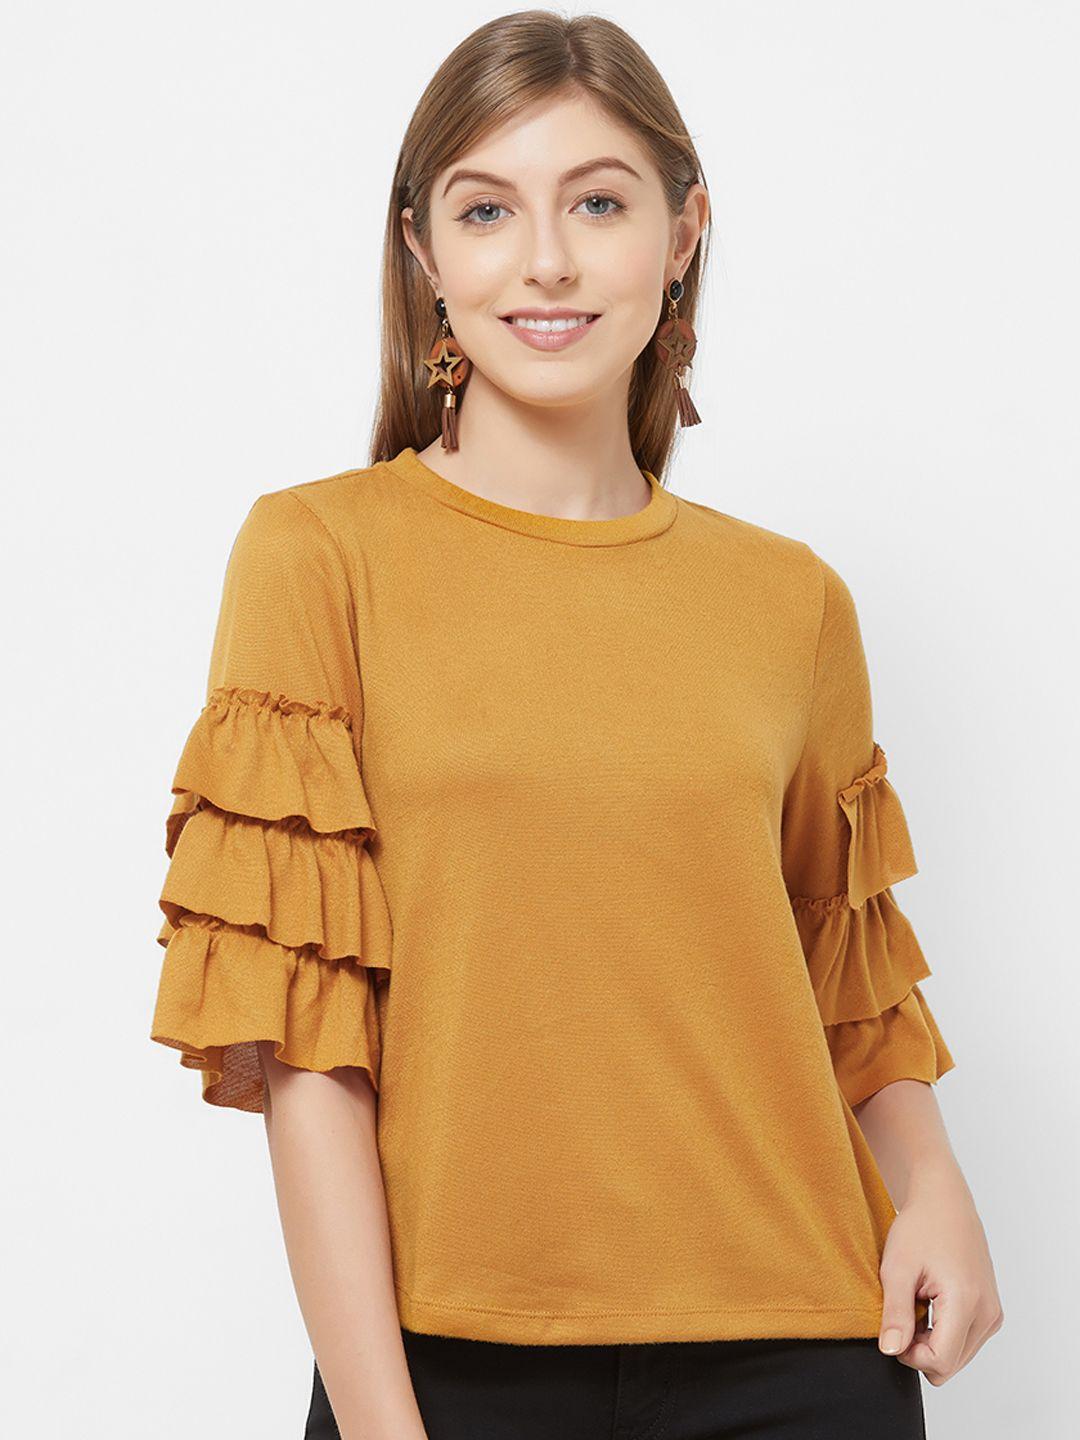 109f women yellow solid top